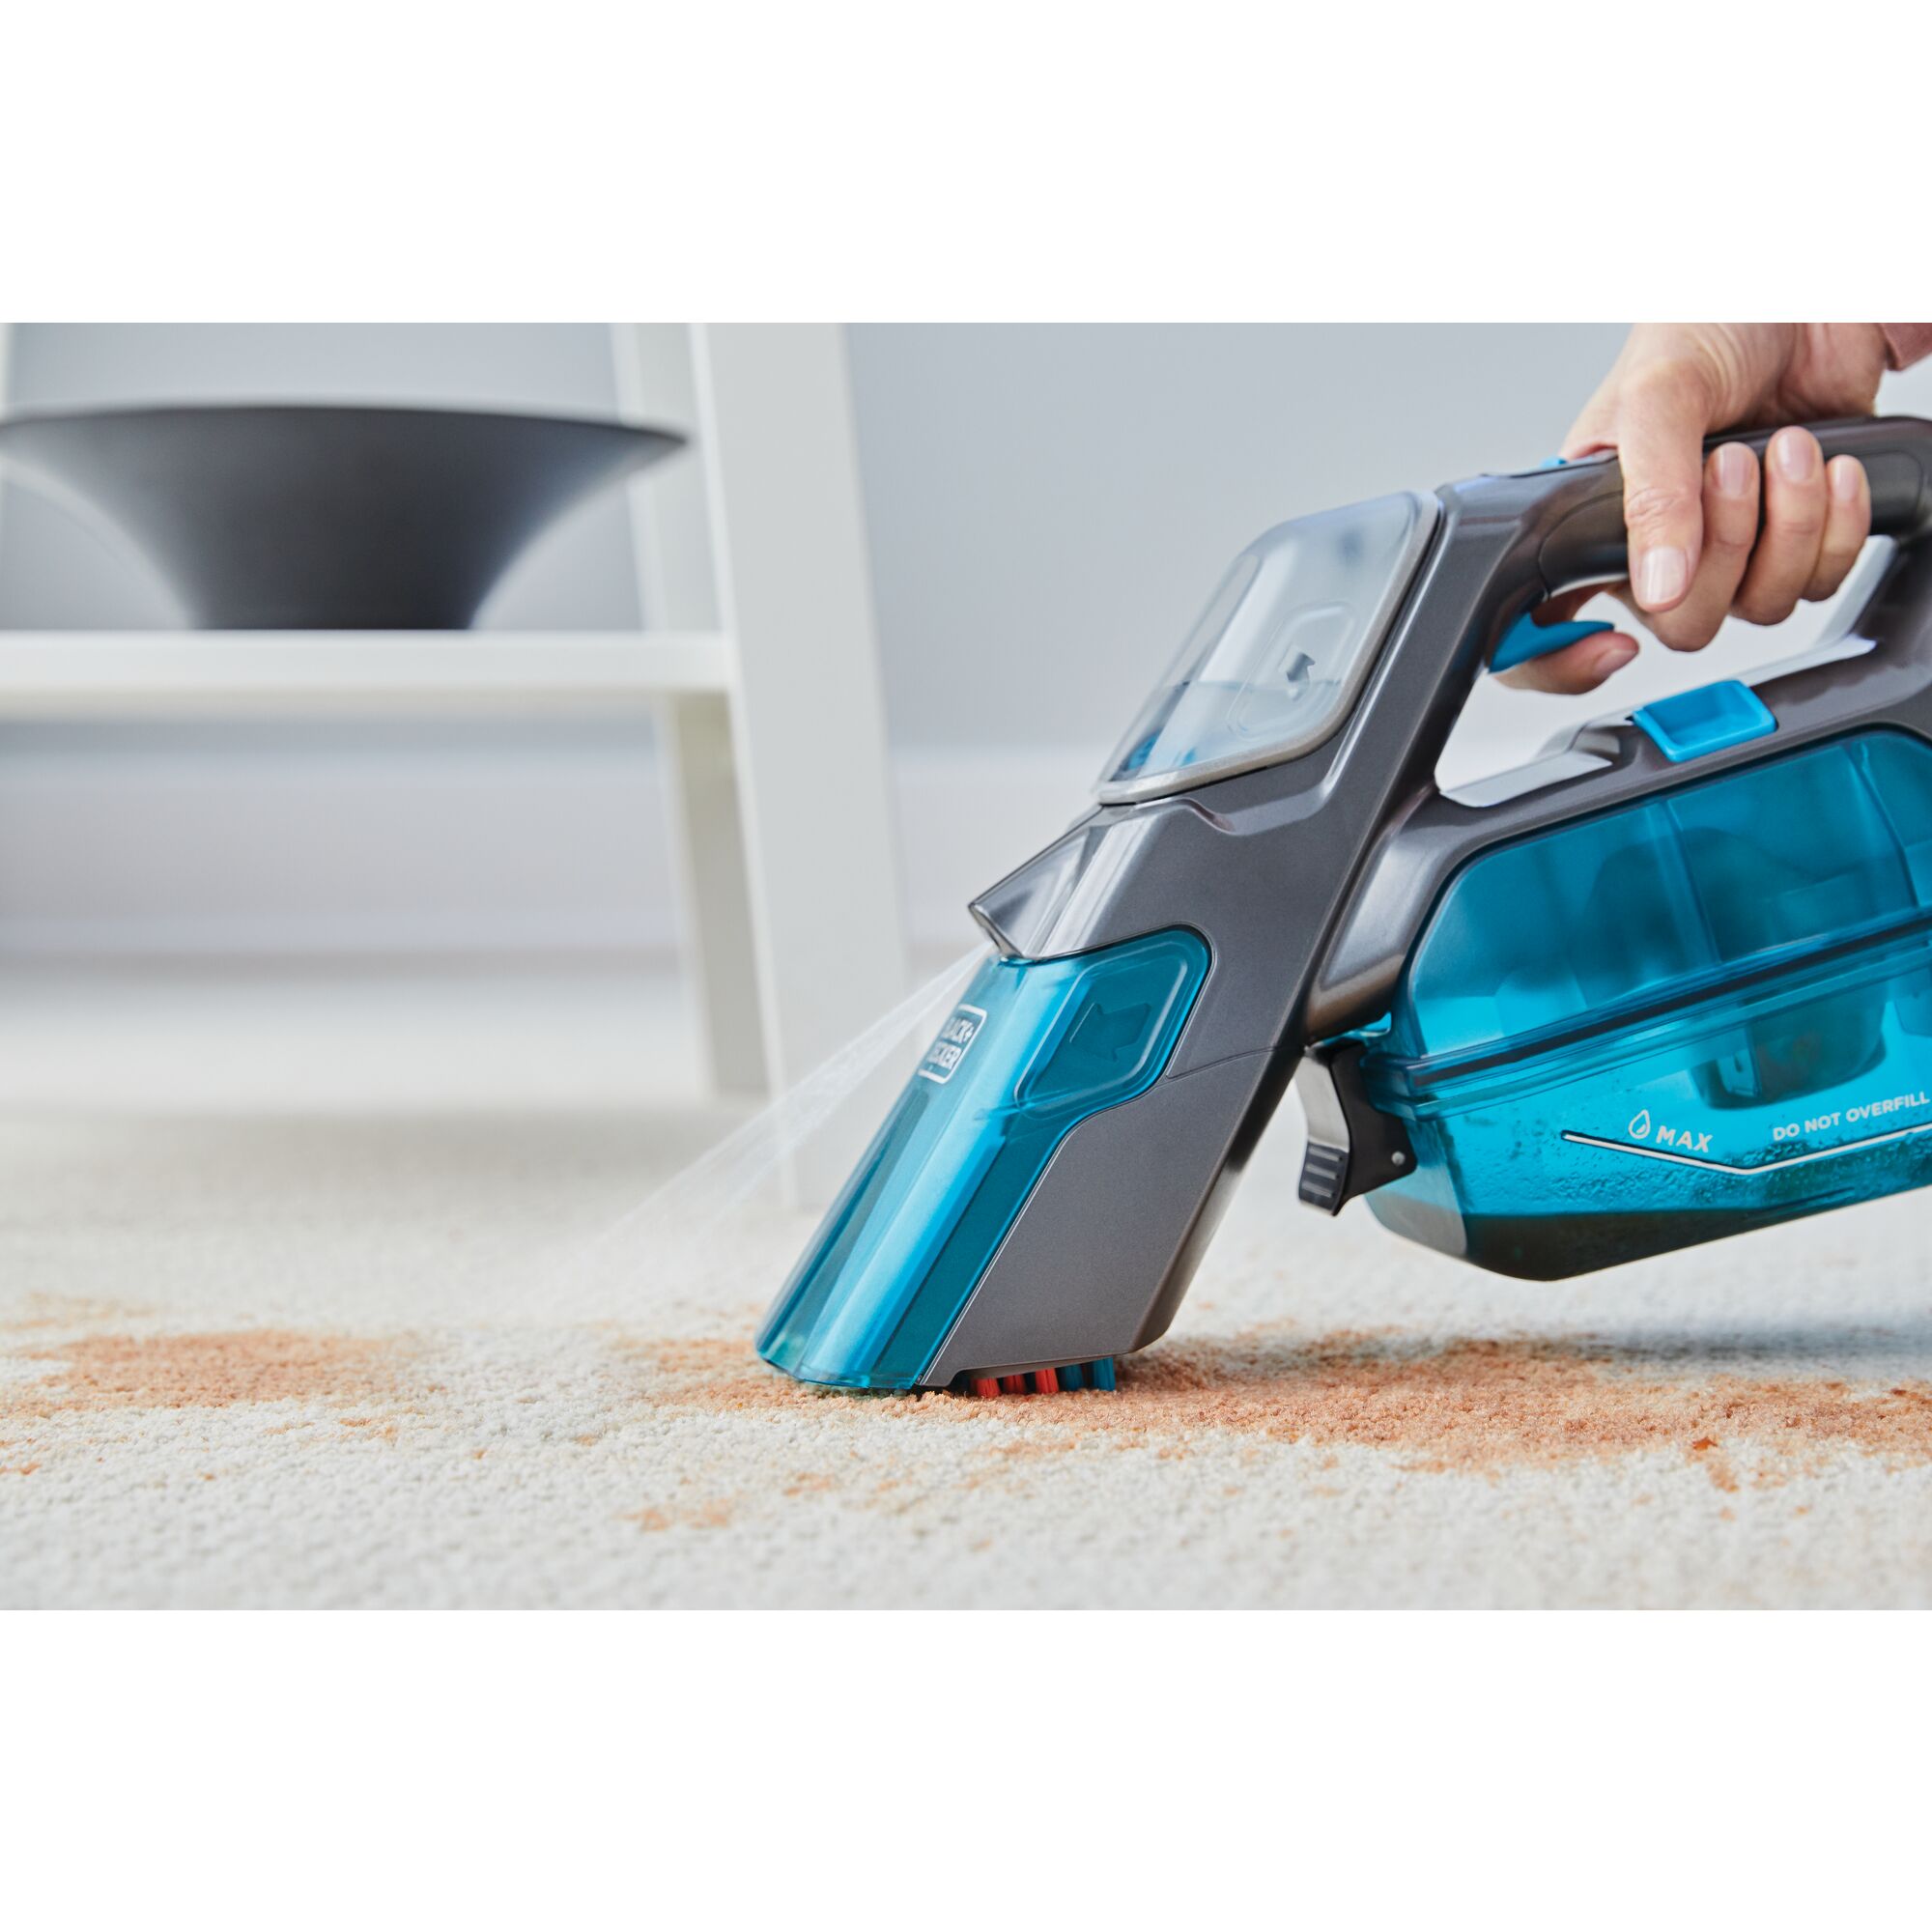 Black and decker Spillbuster Cordless Spill and Spot Cleaner With Extra Filter being used by a person to clean up a mess from a light colored floor